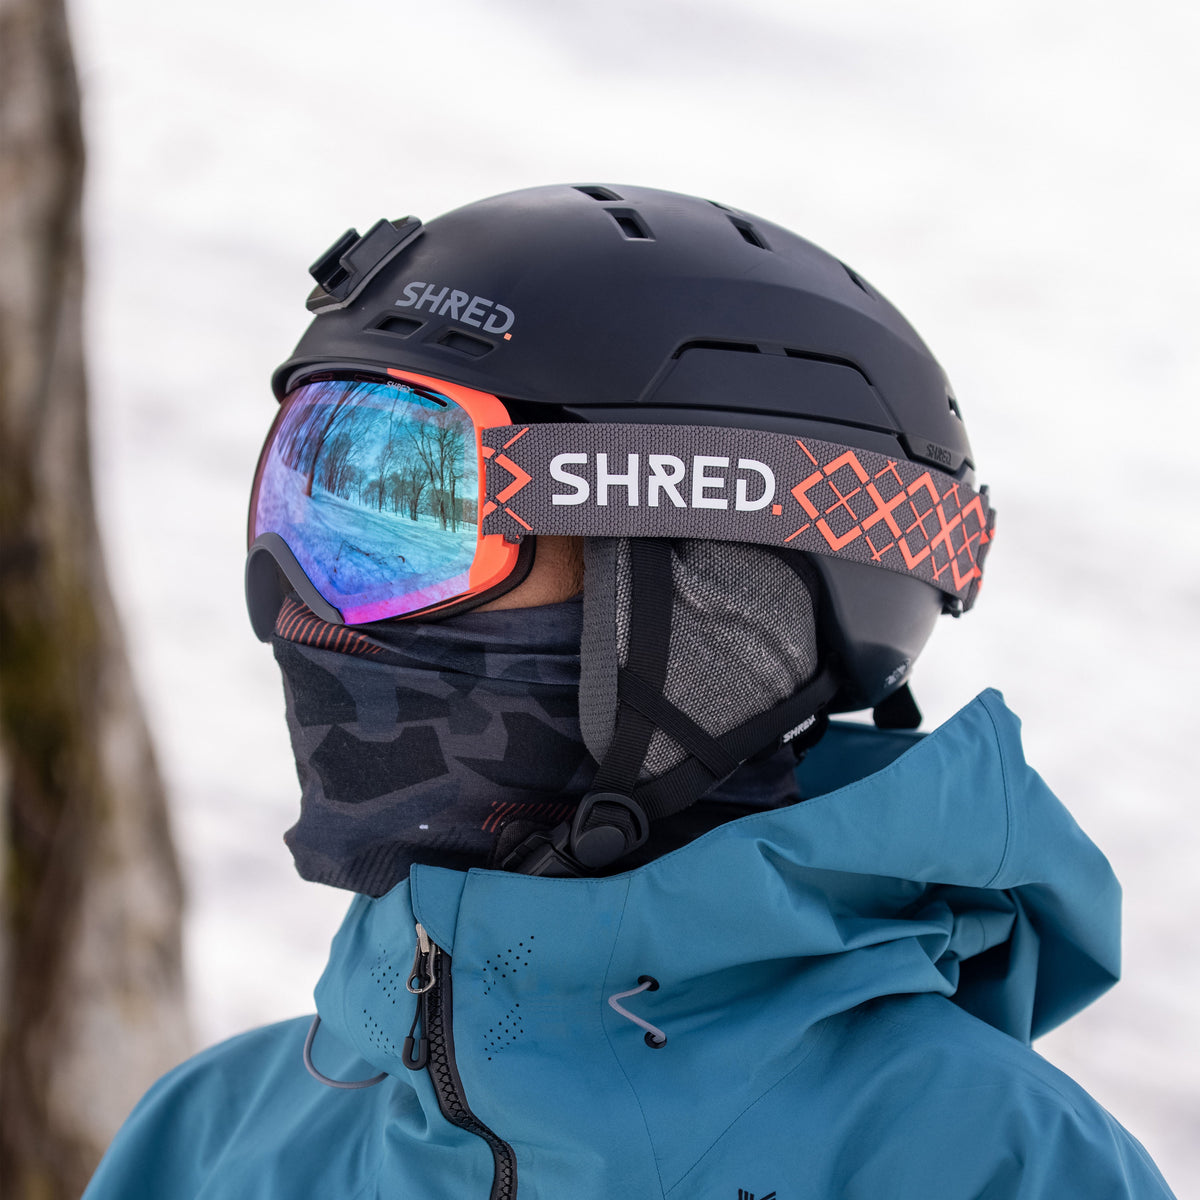 How to pair goggles with a ski helmet